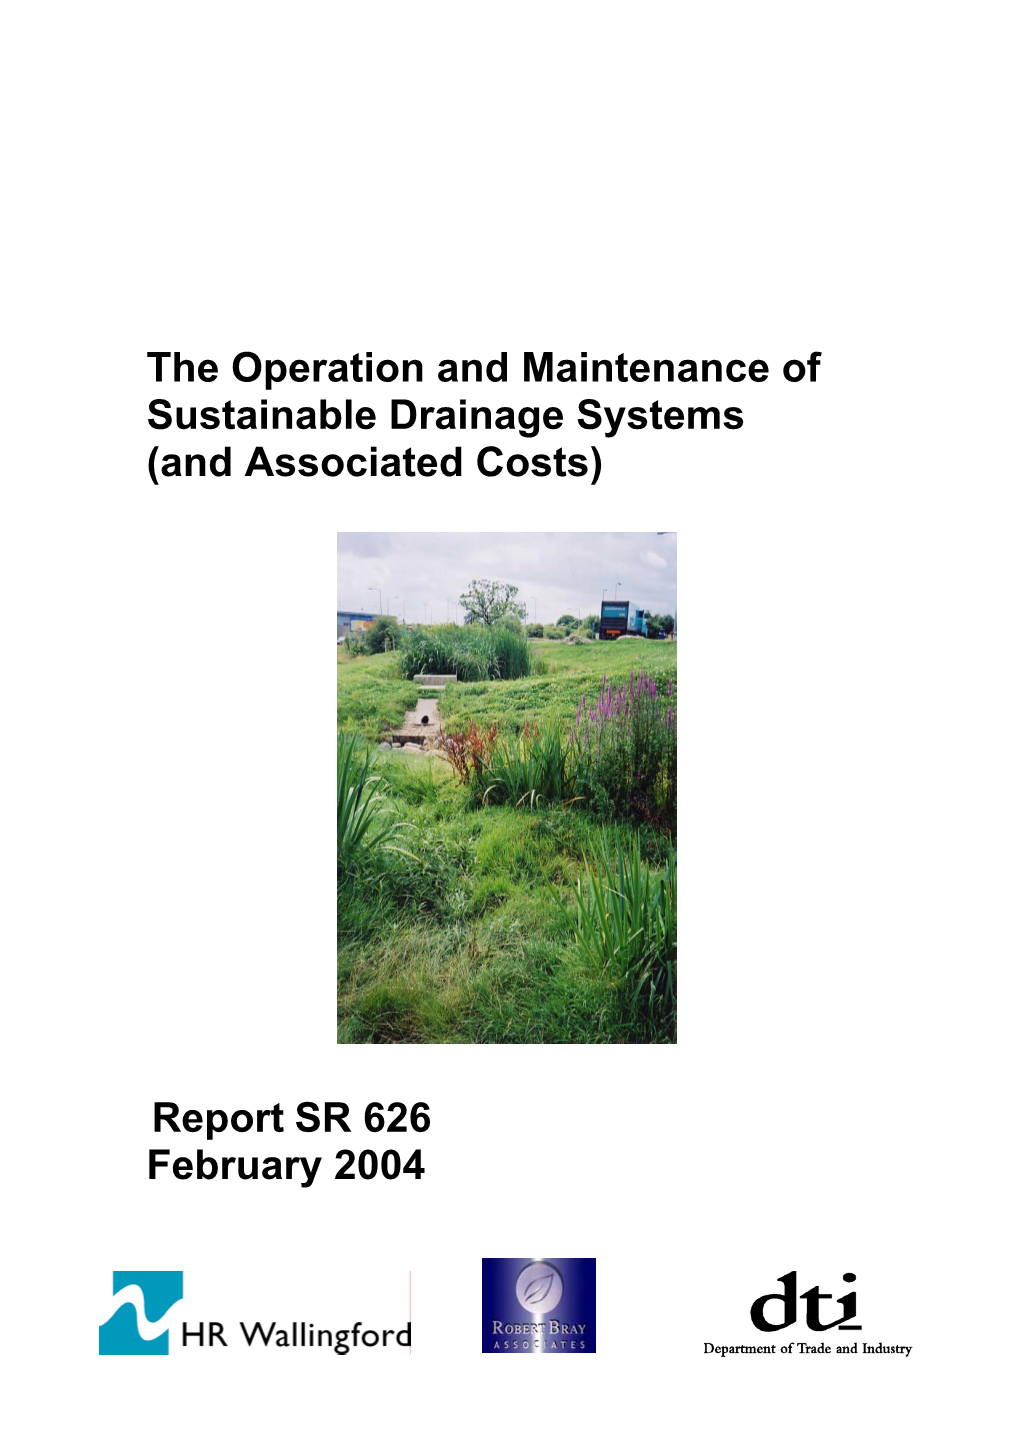 The Operation and Maintenance of Sustainable Drainage Systems (And Associated Costs)